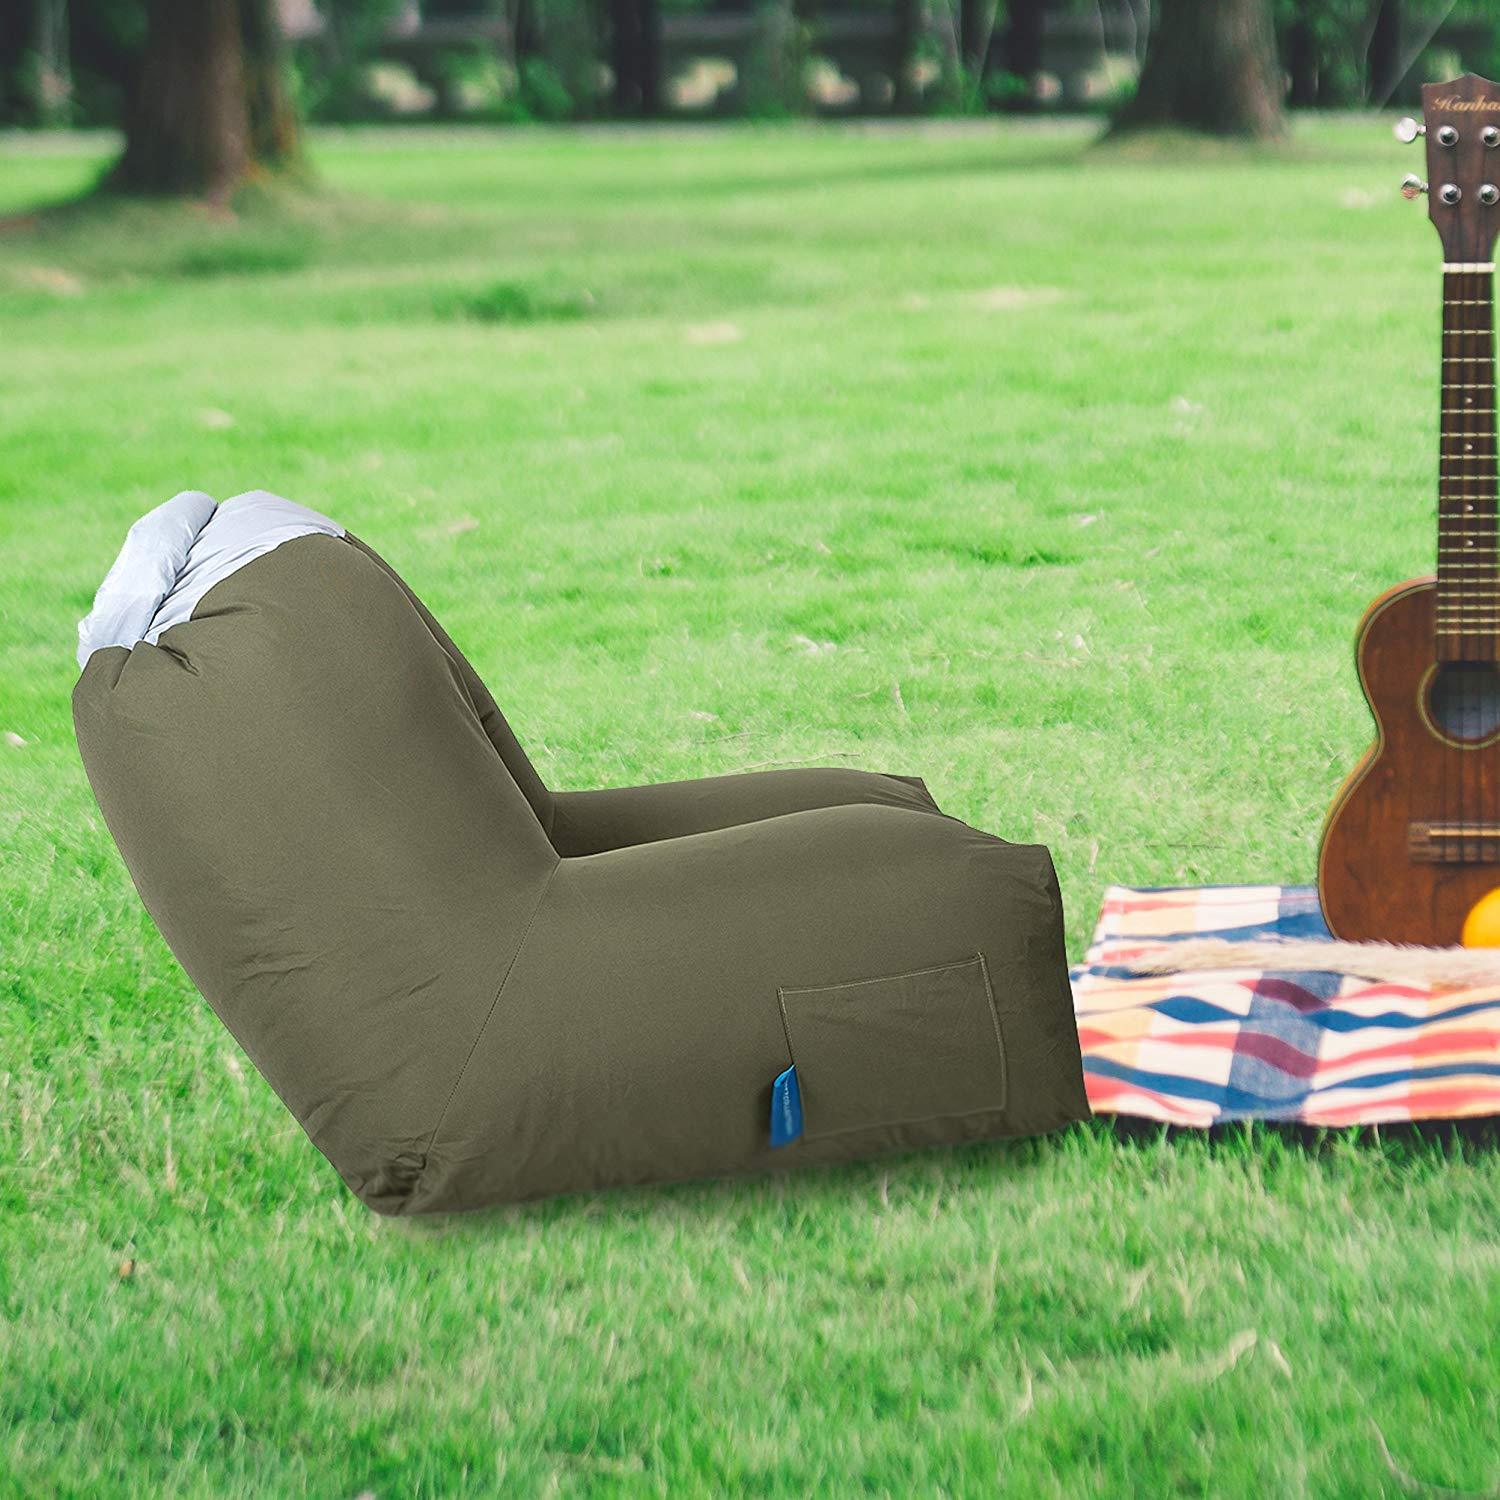 Bosonshop Inflatable Portable Hangout Sofa with Carry Bag Perfect for Camping